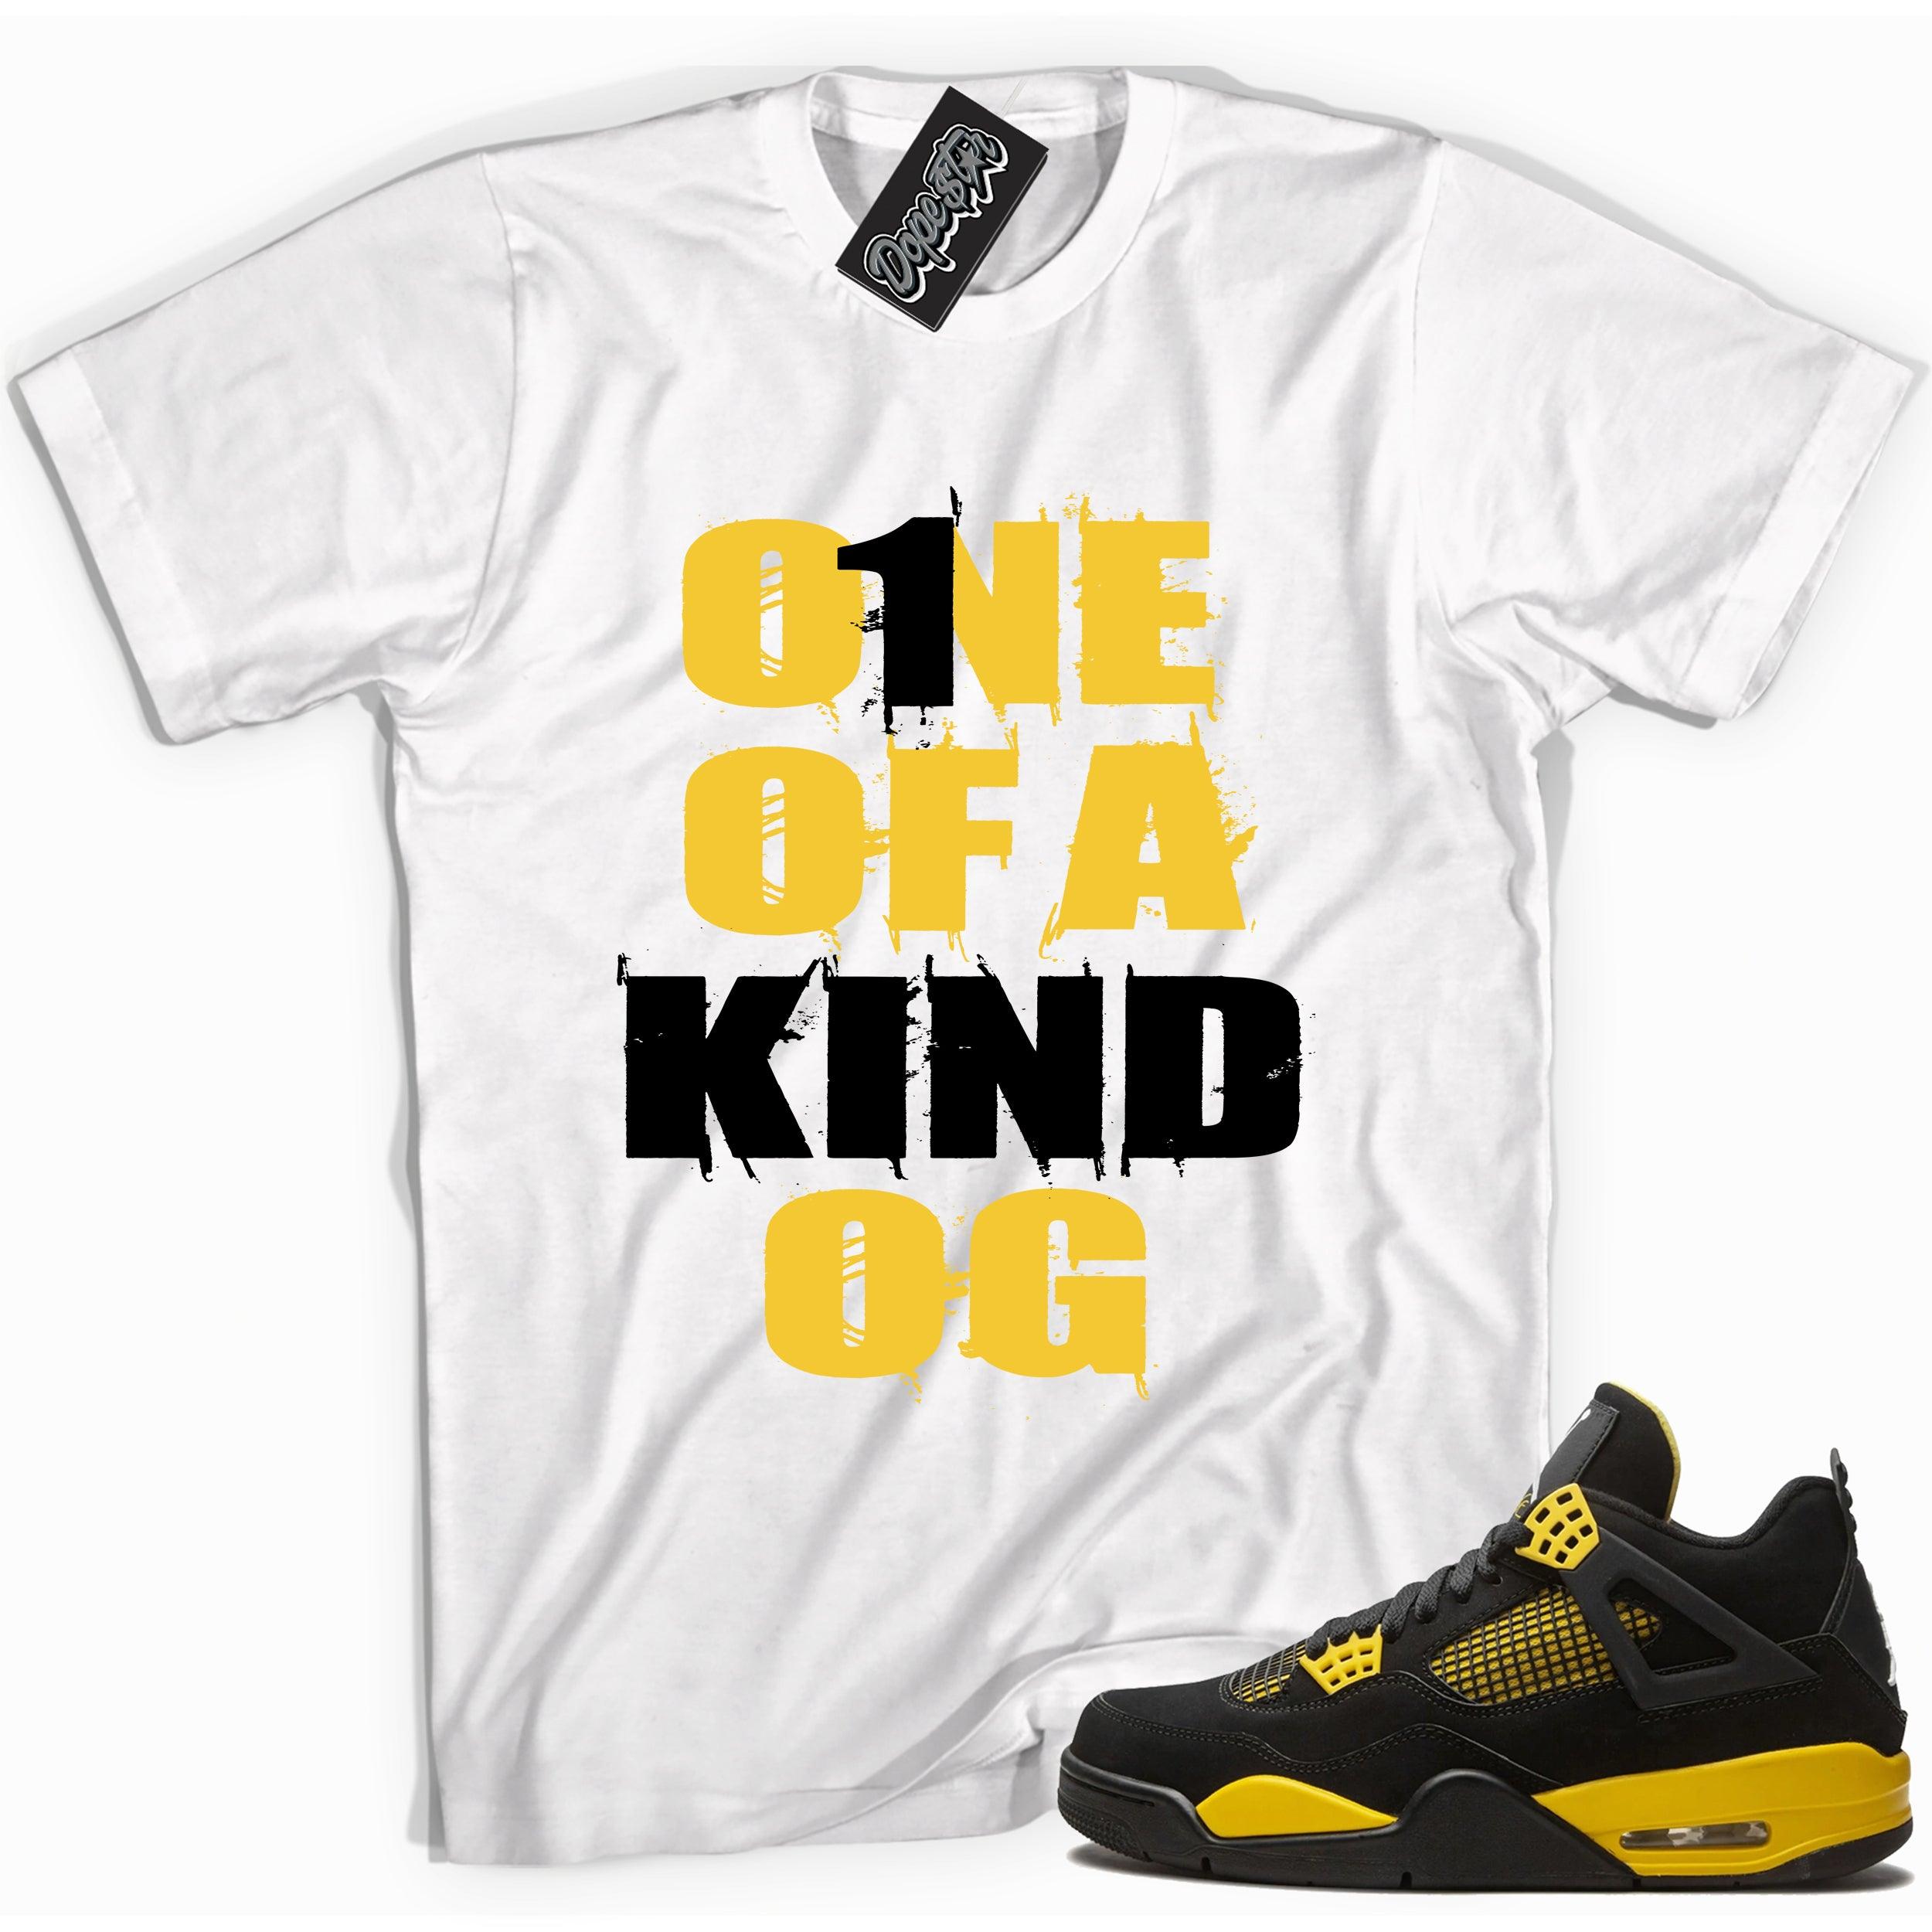 Cool white graphic tee with 'one of a kind' print, that perfectly matches Air Jordan 4 Thunder sneakers